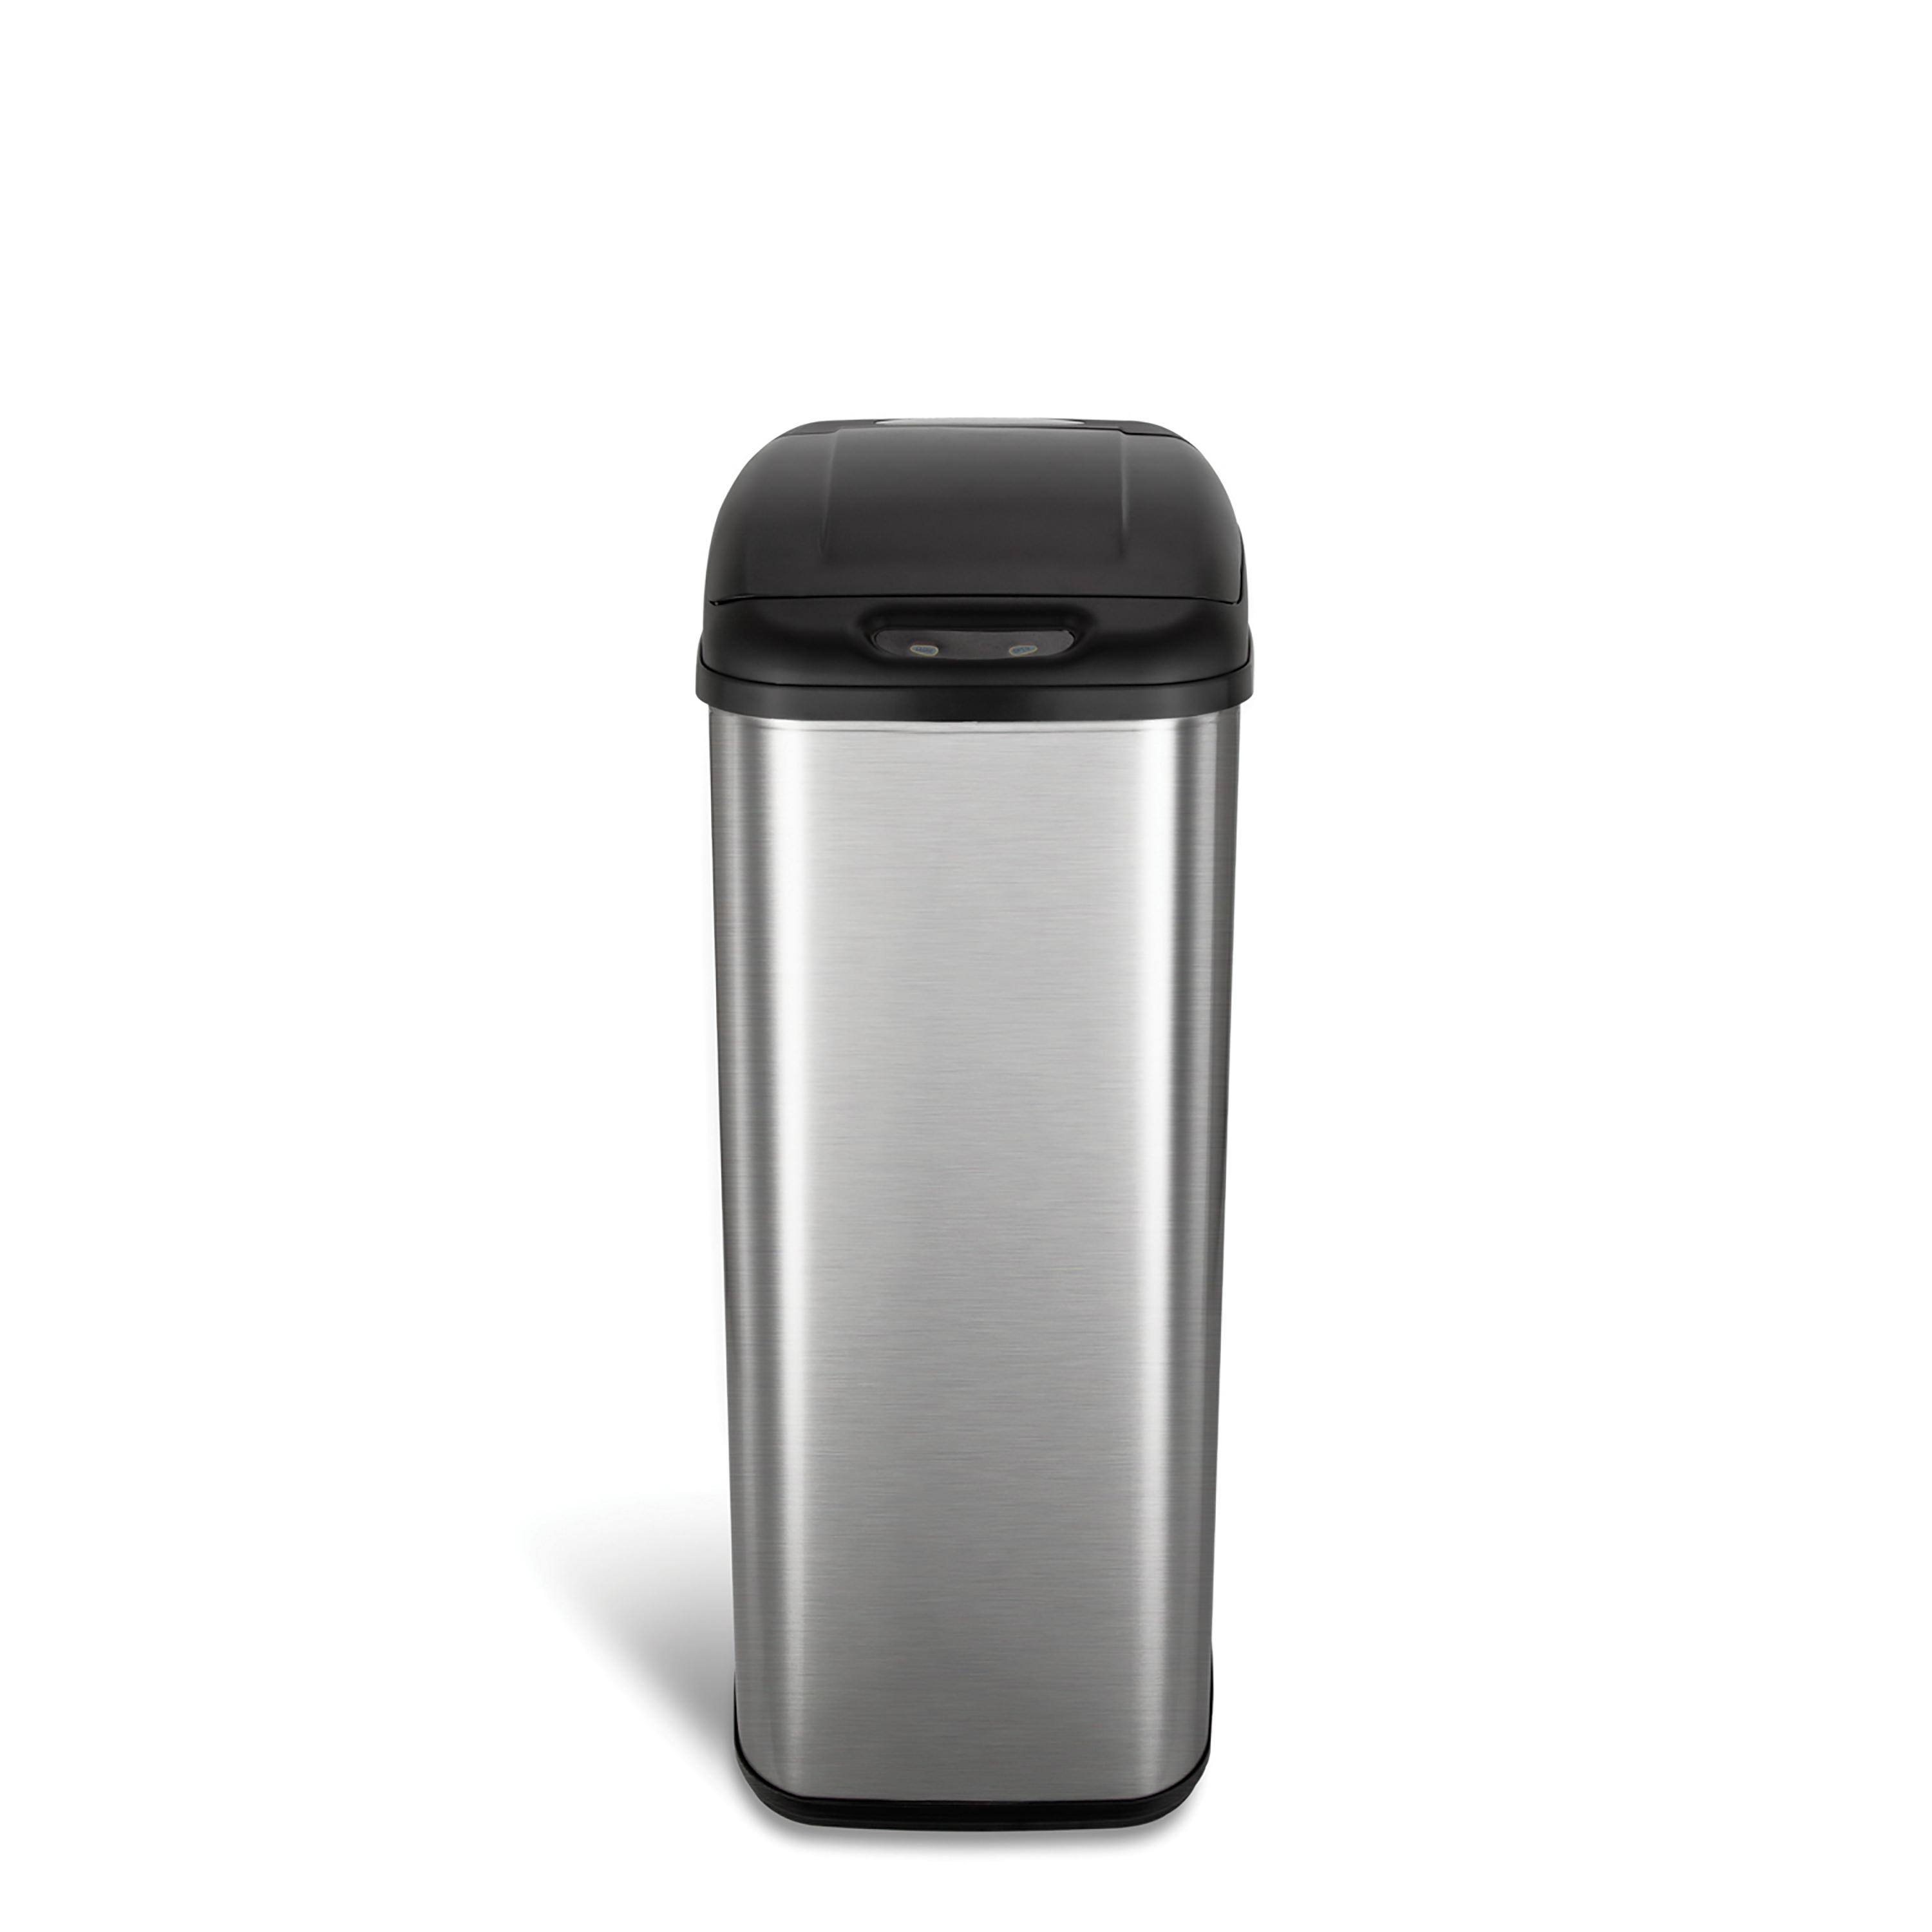 NineStars DZT-50-6 Touchless Stainless Steel 13.2 Gallon Trash Can - image 1 of 11